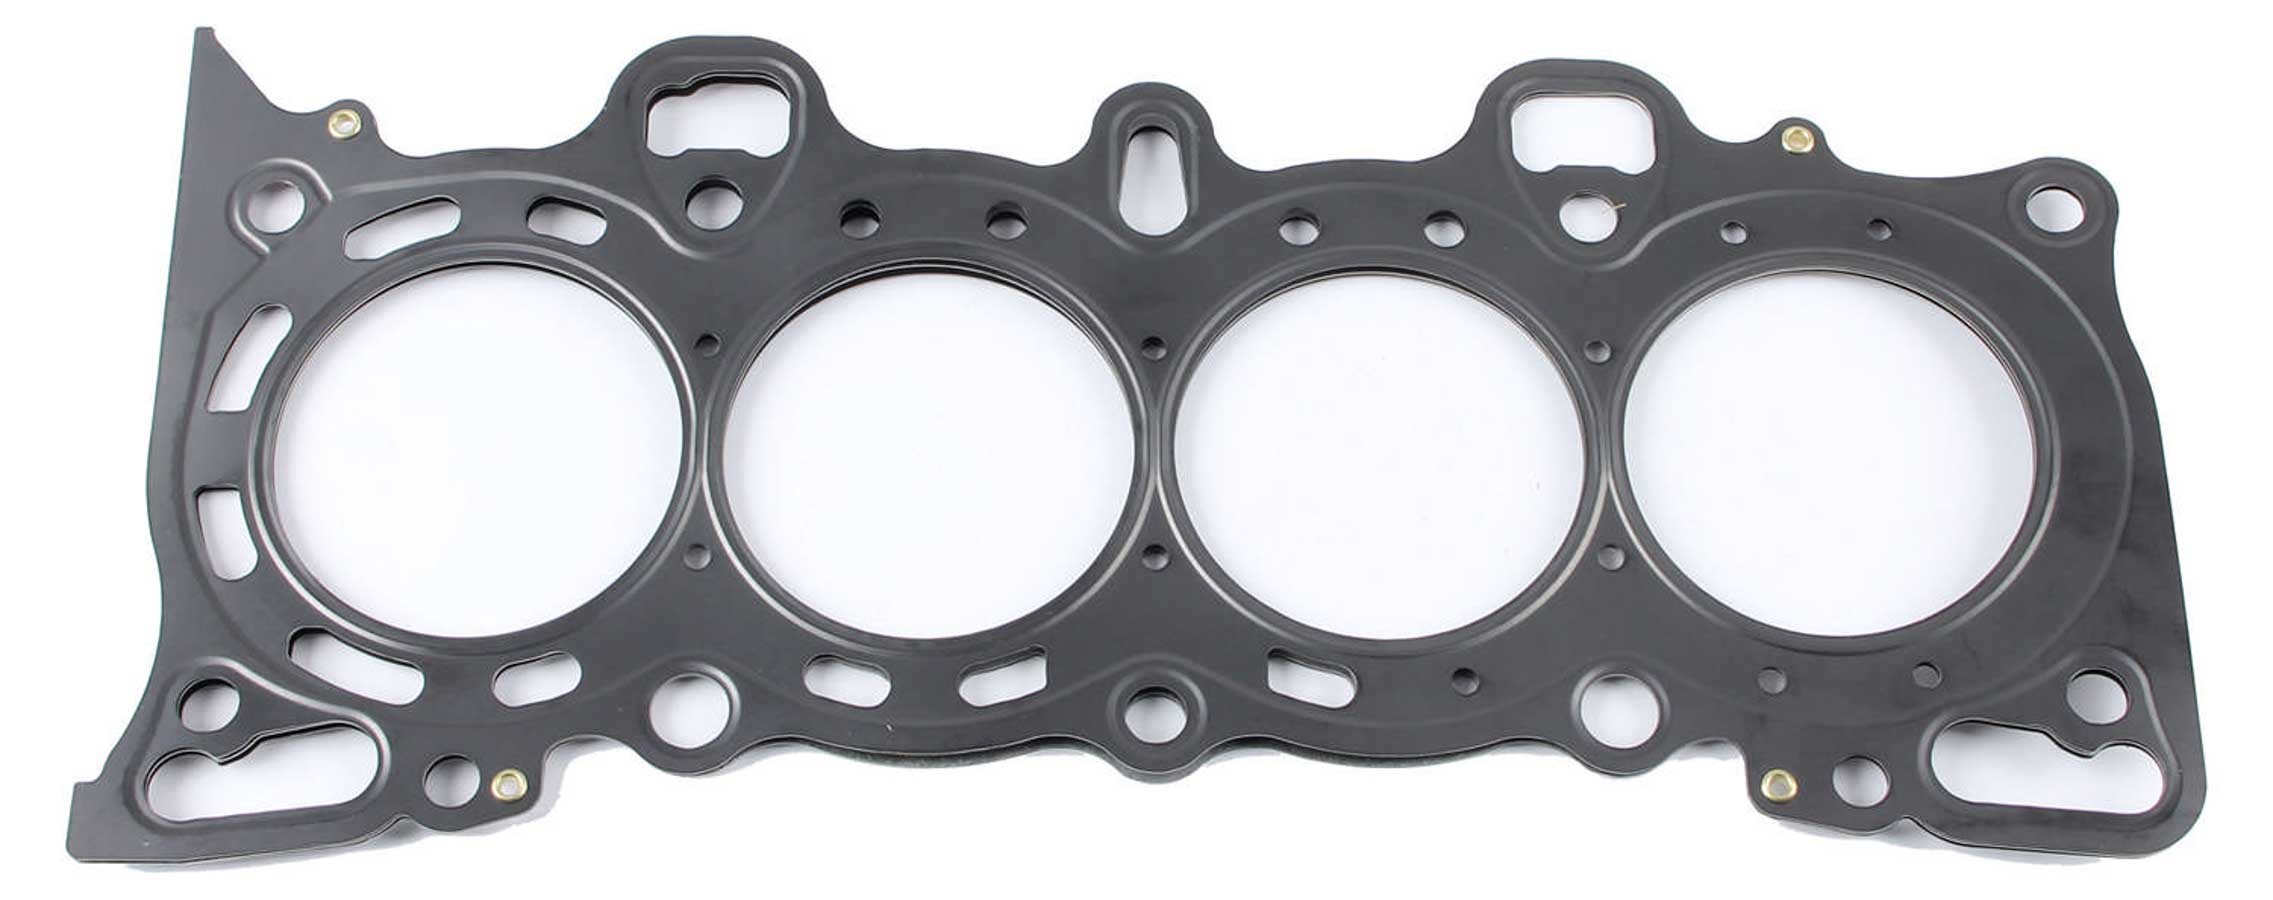 Cometic Gaskets C4195-030 Cylinder Head Gasket, 76.0 mm Bore, 0.030 in Compression Thickness, Multi-Layer Steel, Honda D-Series, Each